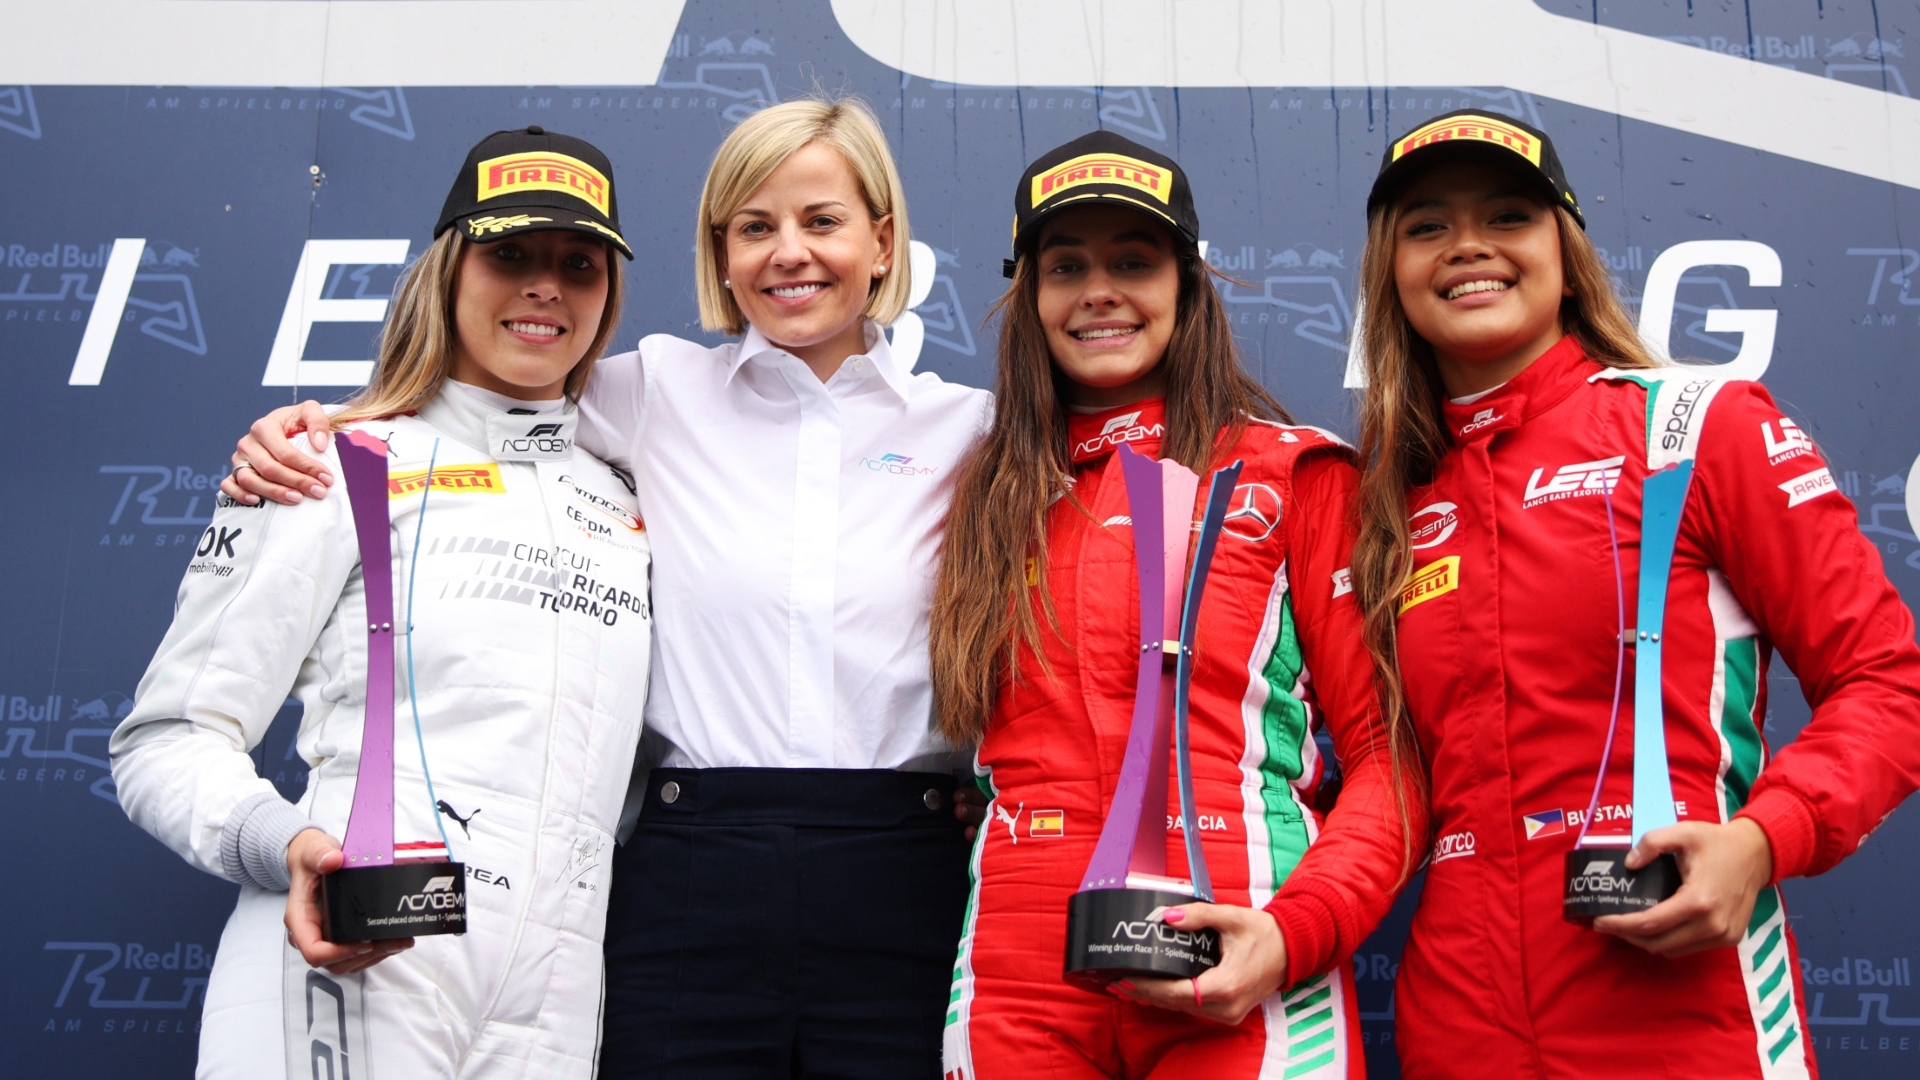 How the F1 Academy is creating a pathway for female drivers into F1 - Stream the Video